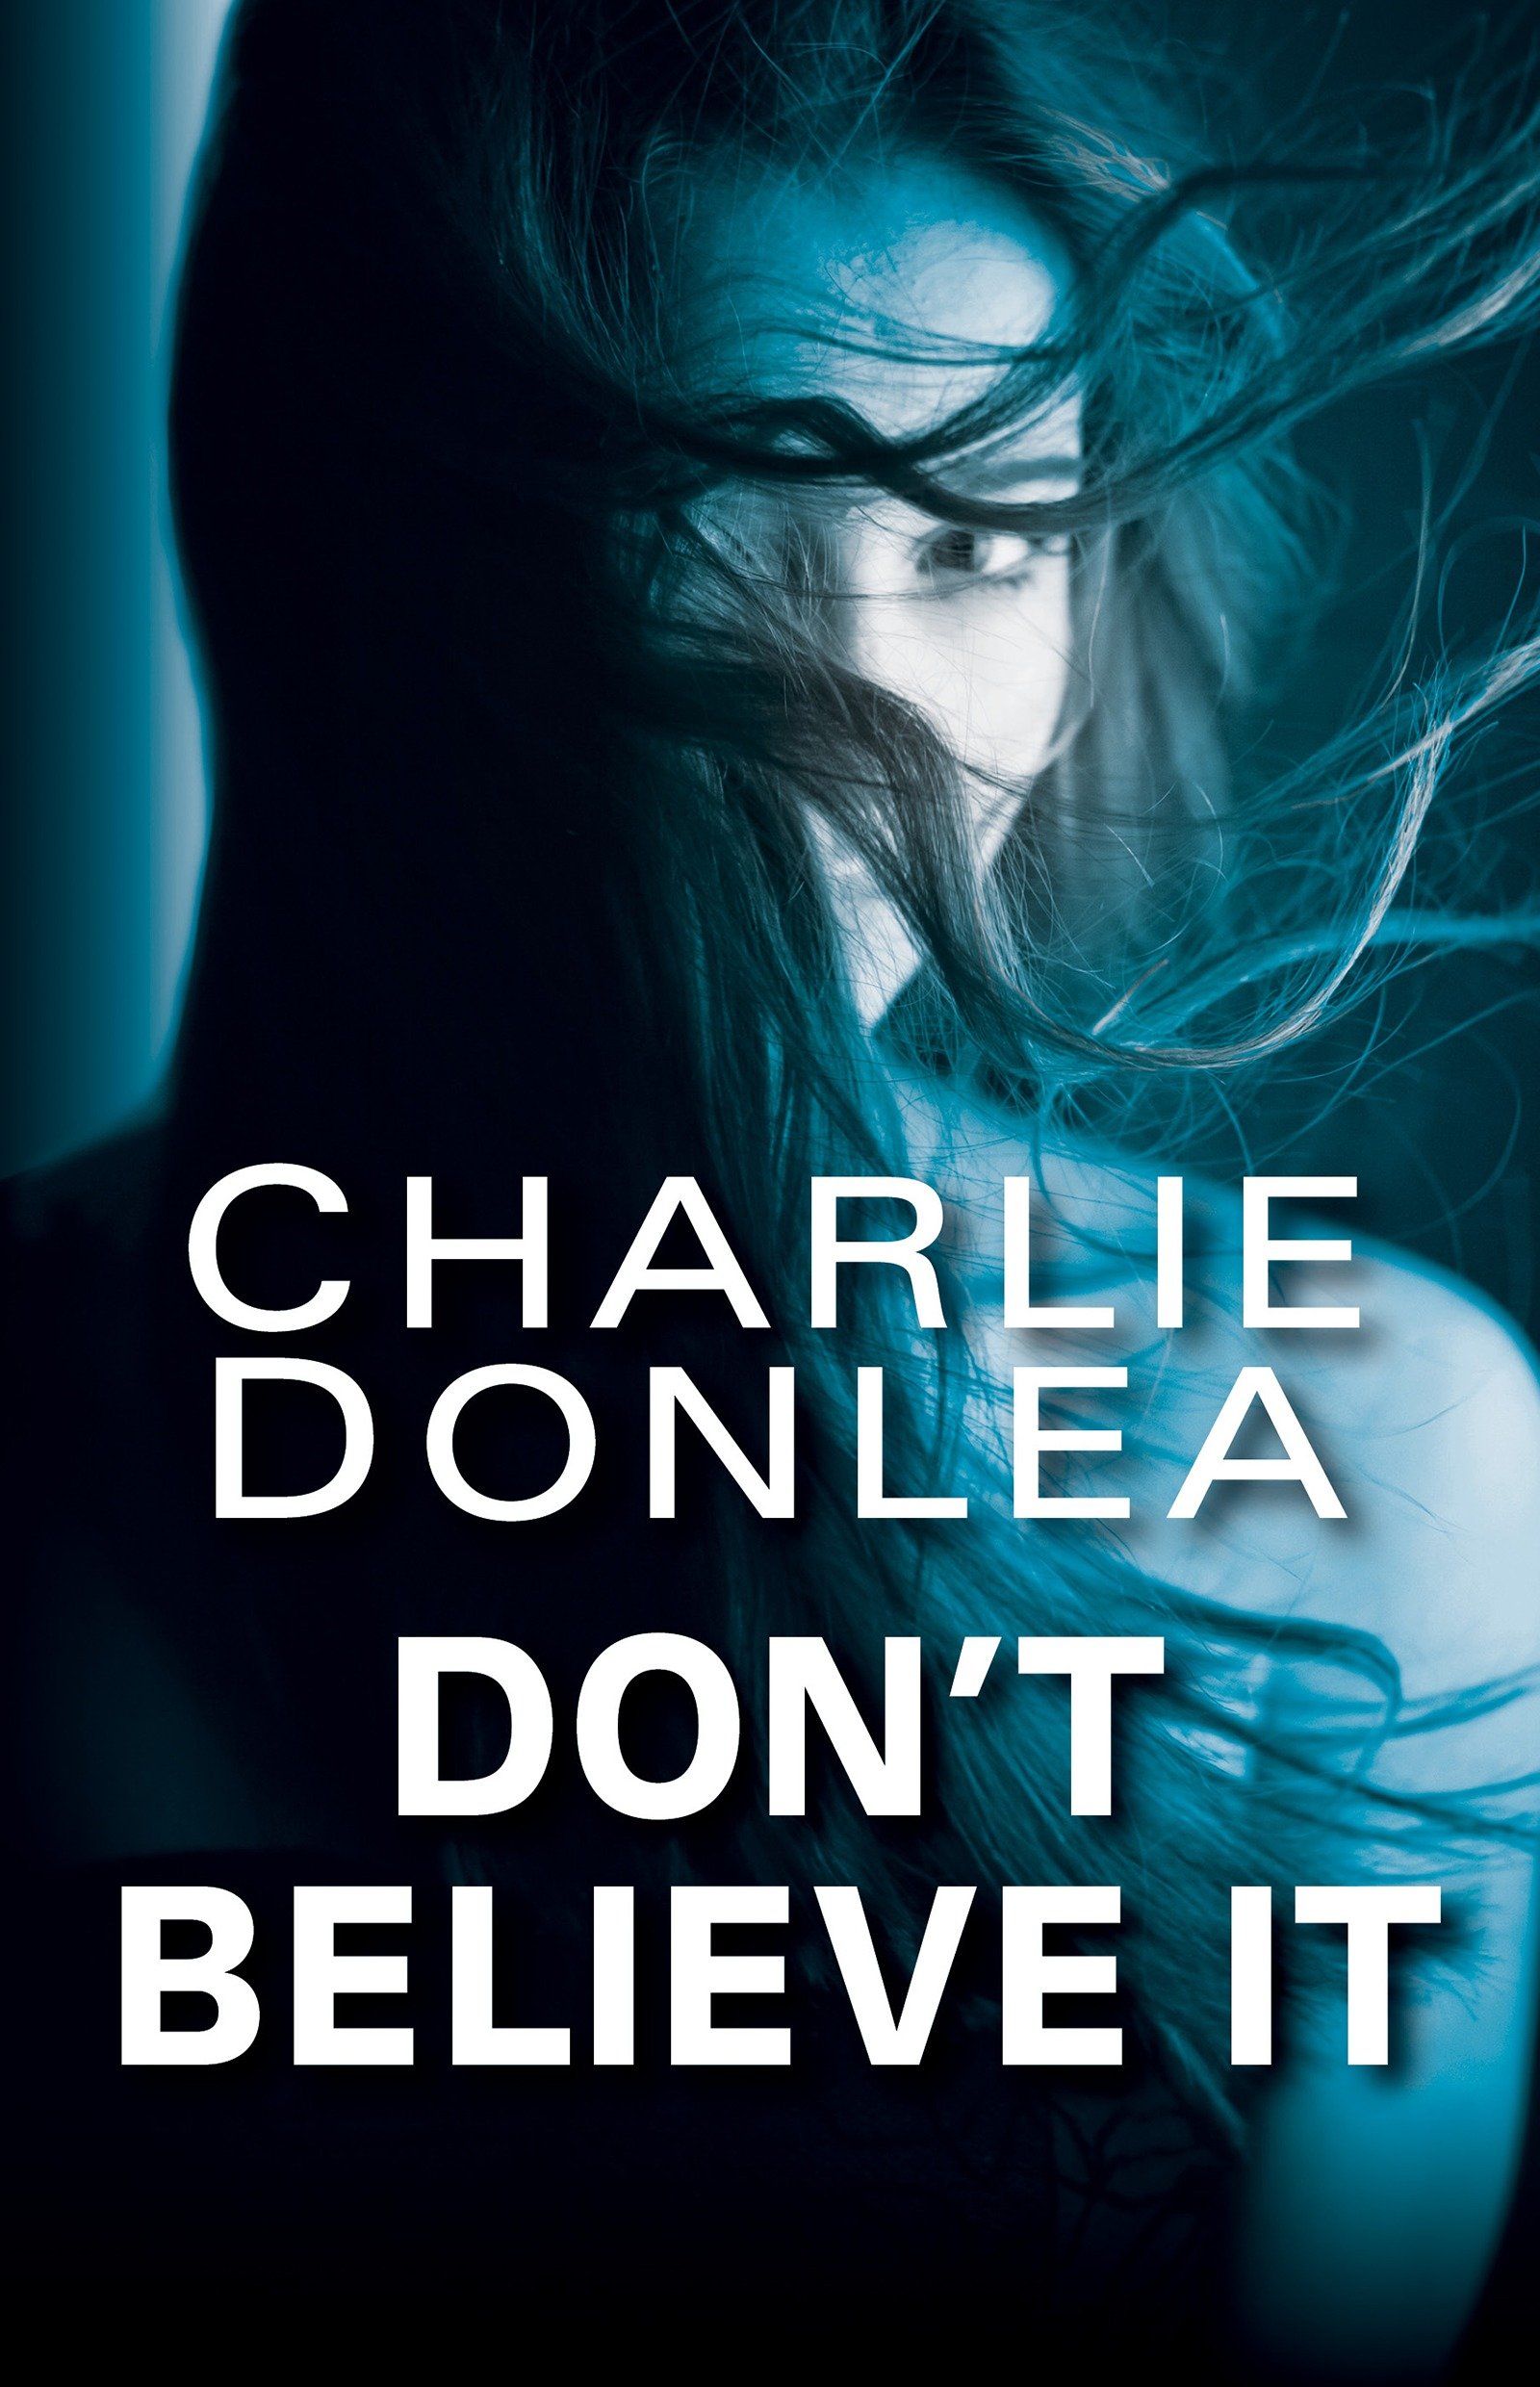 Don't believe it cover image